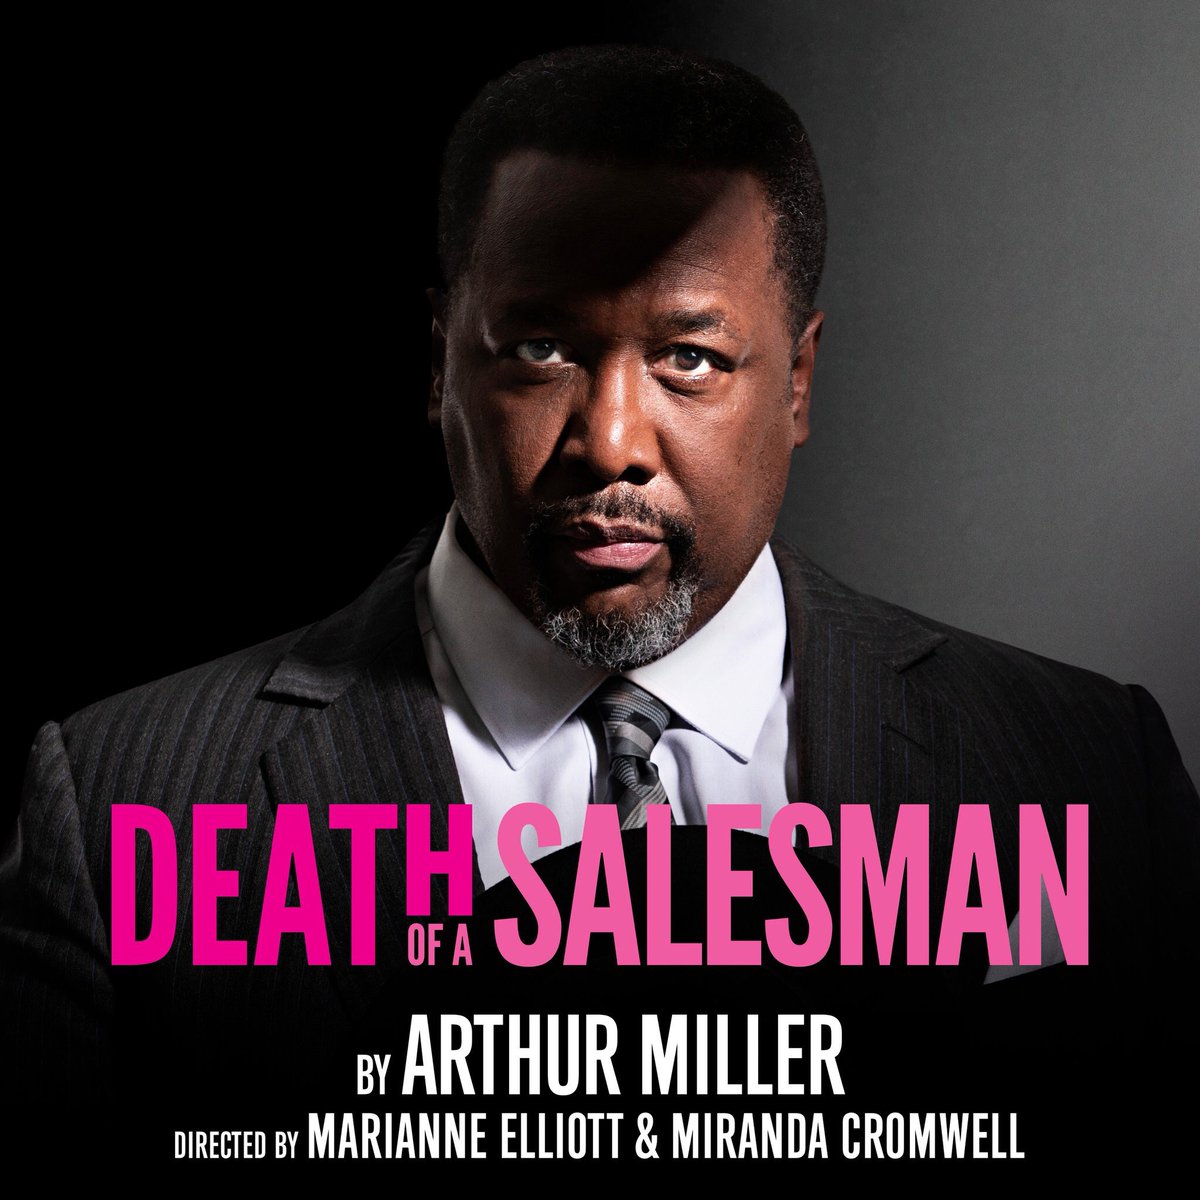 Image result for Death of a salesman poster wendell pierce